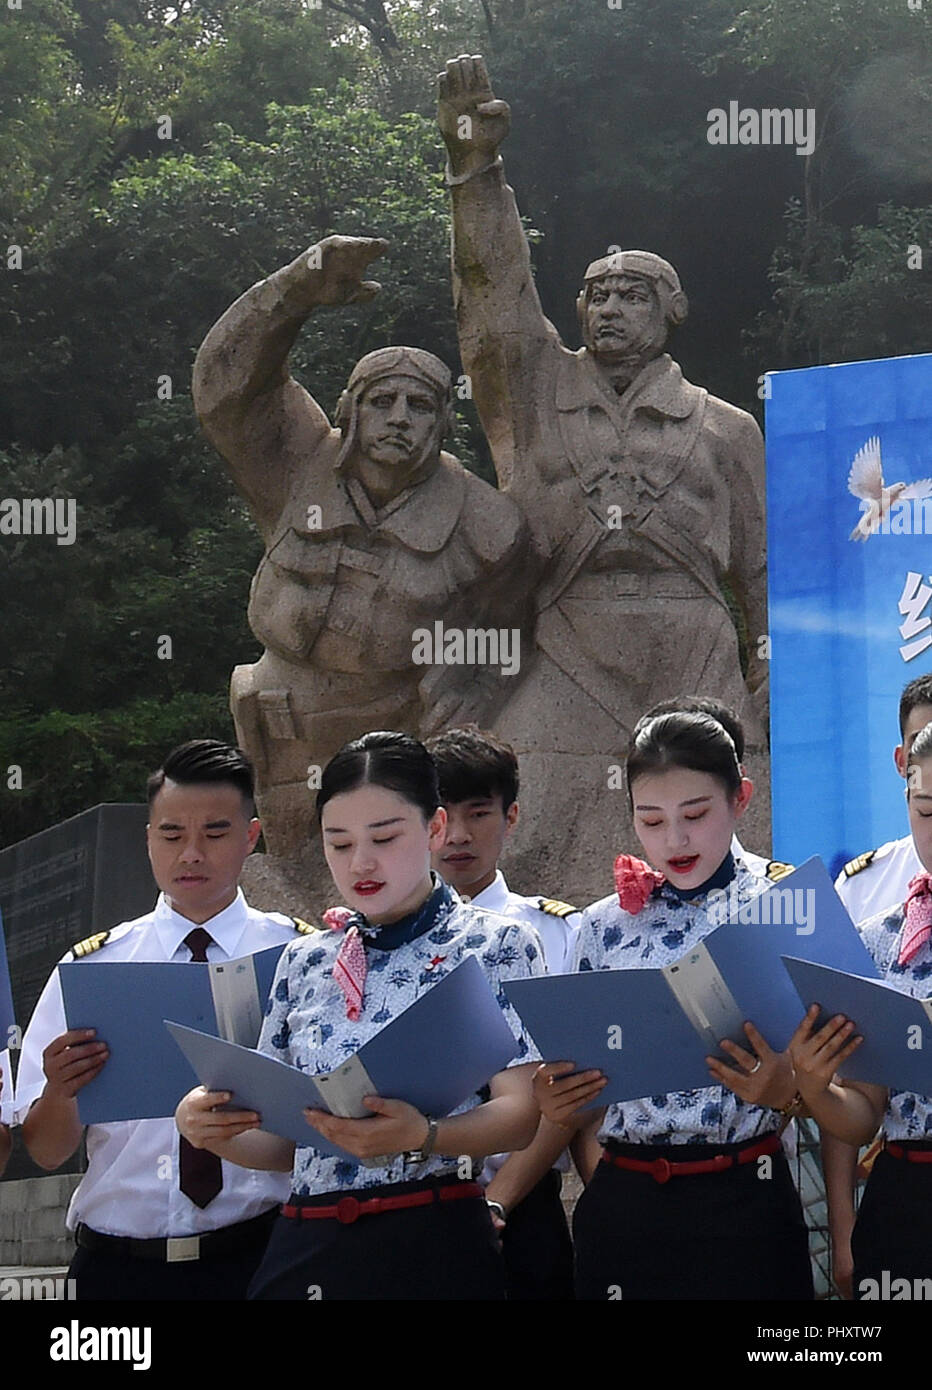 Nanjing, China's Jiangsu Province. 3rd Sep, 2018. Airline staff recite poems during an activity to commemorate the 73rd anniversary of the victory in the Chinese People's War of Resistance Against Japanese Aggression at Nanjing Anti-Japanese Aviation Martyr Memorial Hall in Nanjing, east China's Jiangsu Province, Sept. 3, 2018. Credit: Sun Can/Xinhua/Alamy Live News Stock Photo